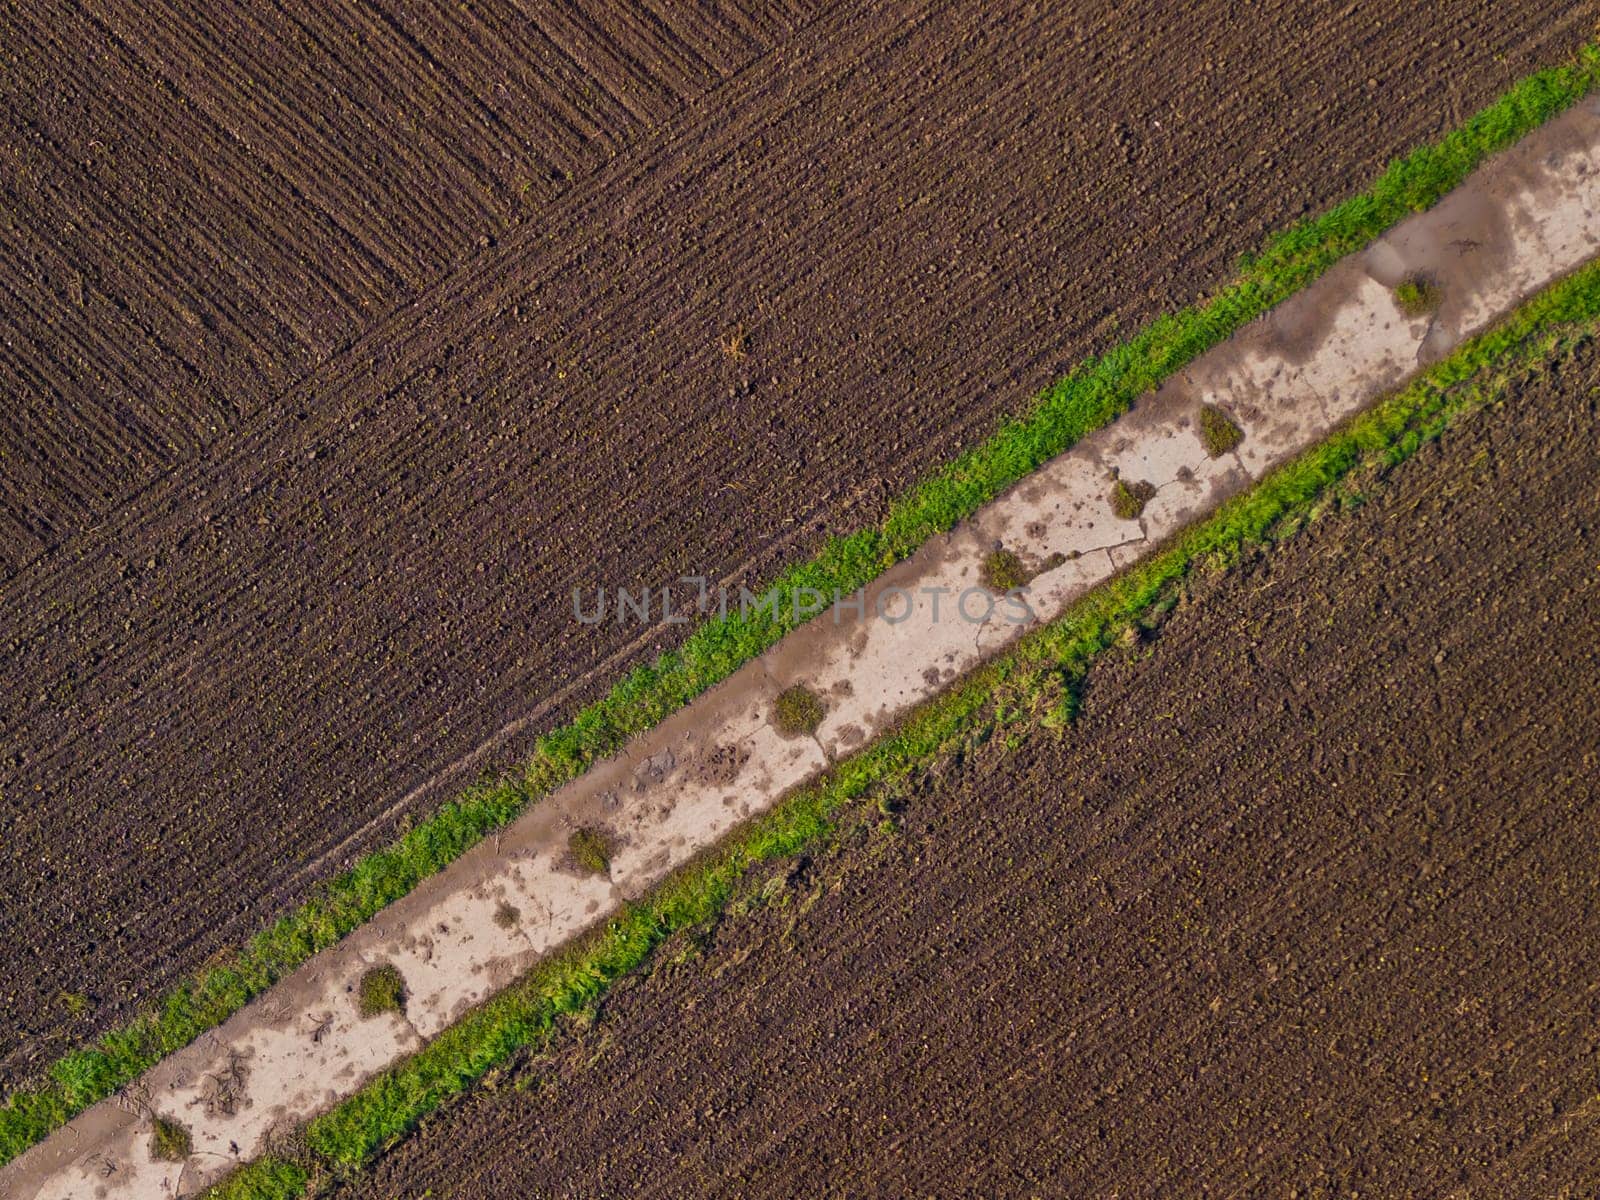 Aerial view with farm track between wet soil on a field by astrosoft